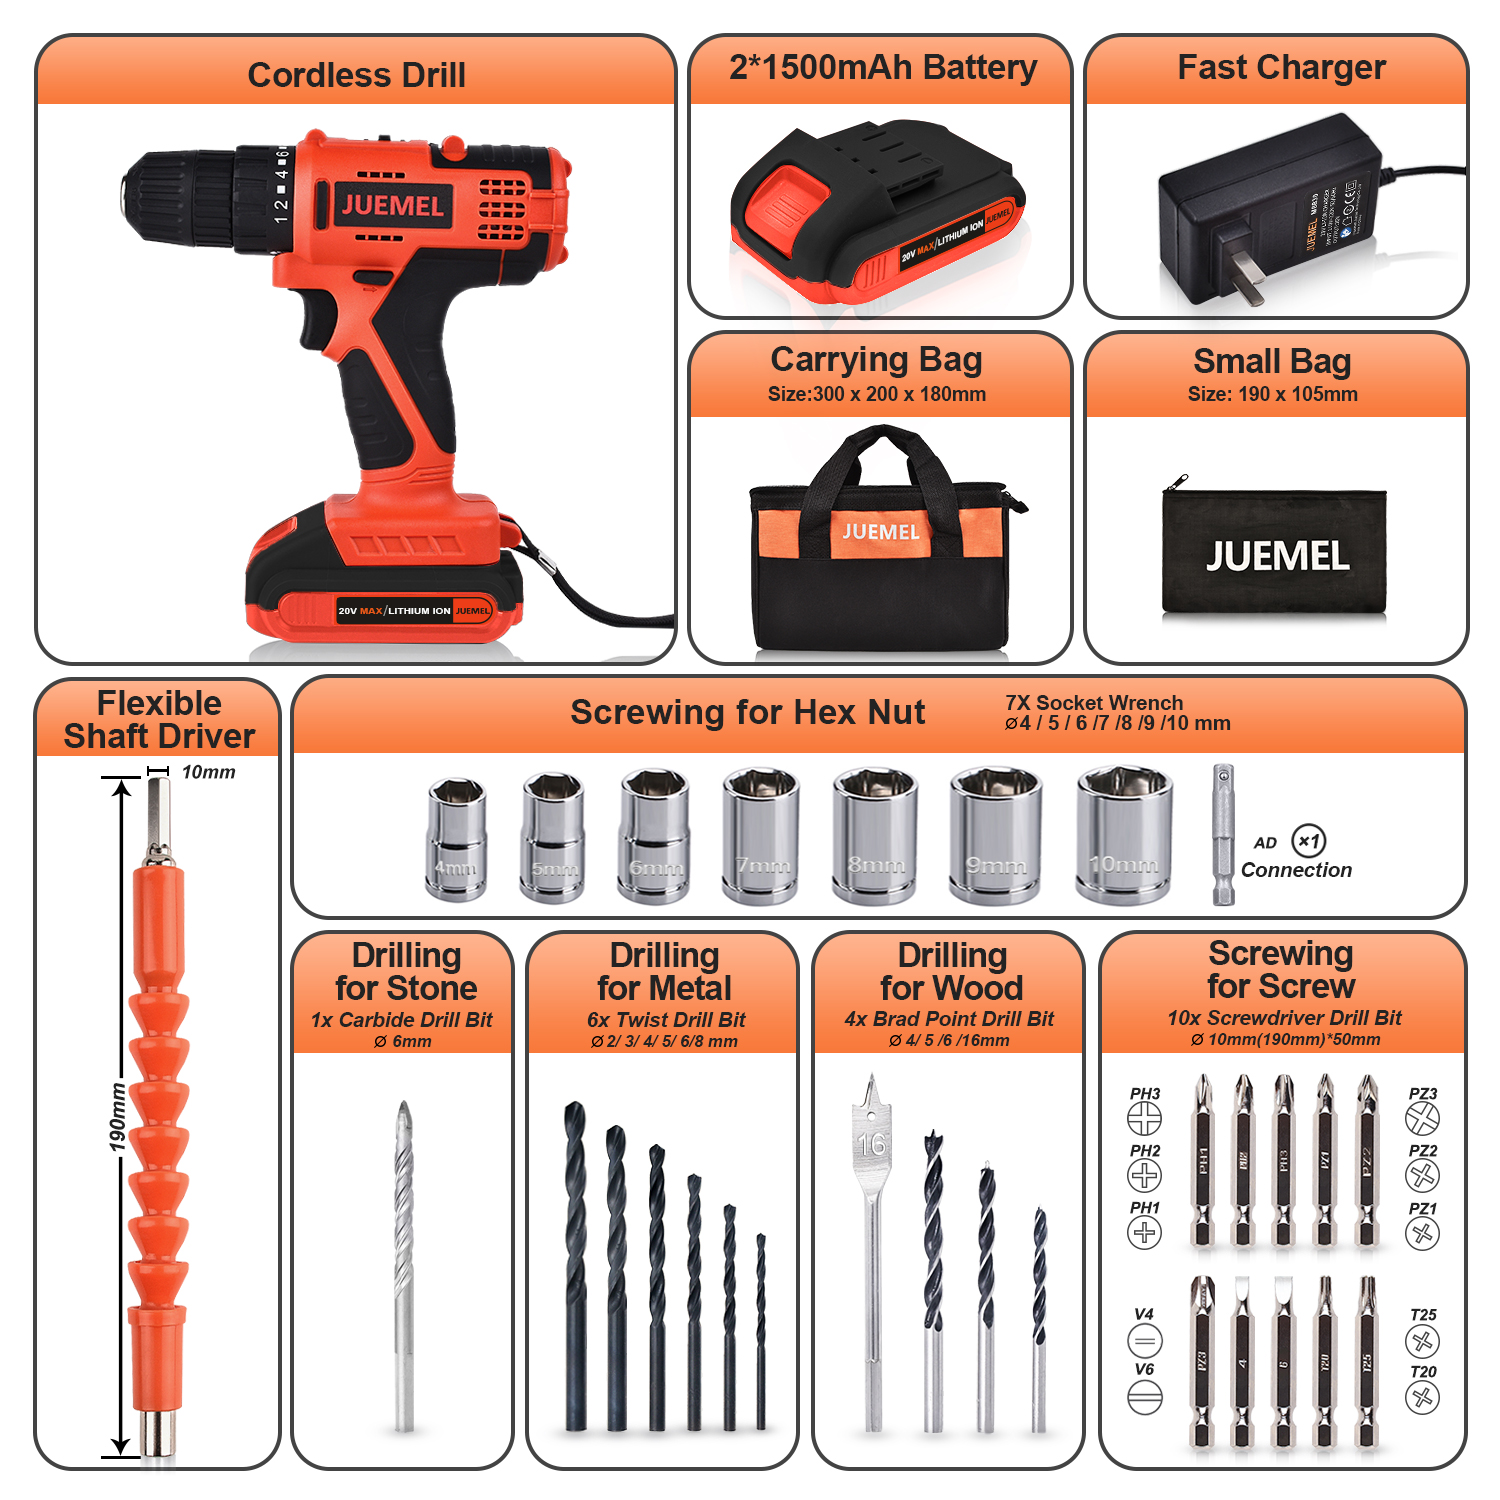 Cordless Drill 20V with 2 Batteries, JUEMEL Power Drill Set with 3/8 inches Keyless Chuck, 2-Variable Speed, 18+1 Clutch, and 30pcs Drill/Driver Bits Accessories